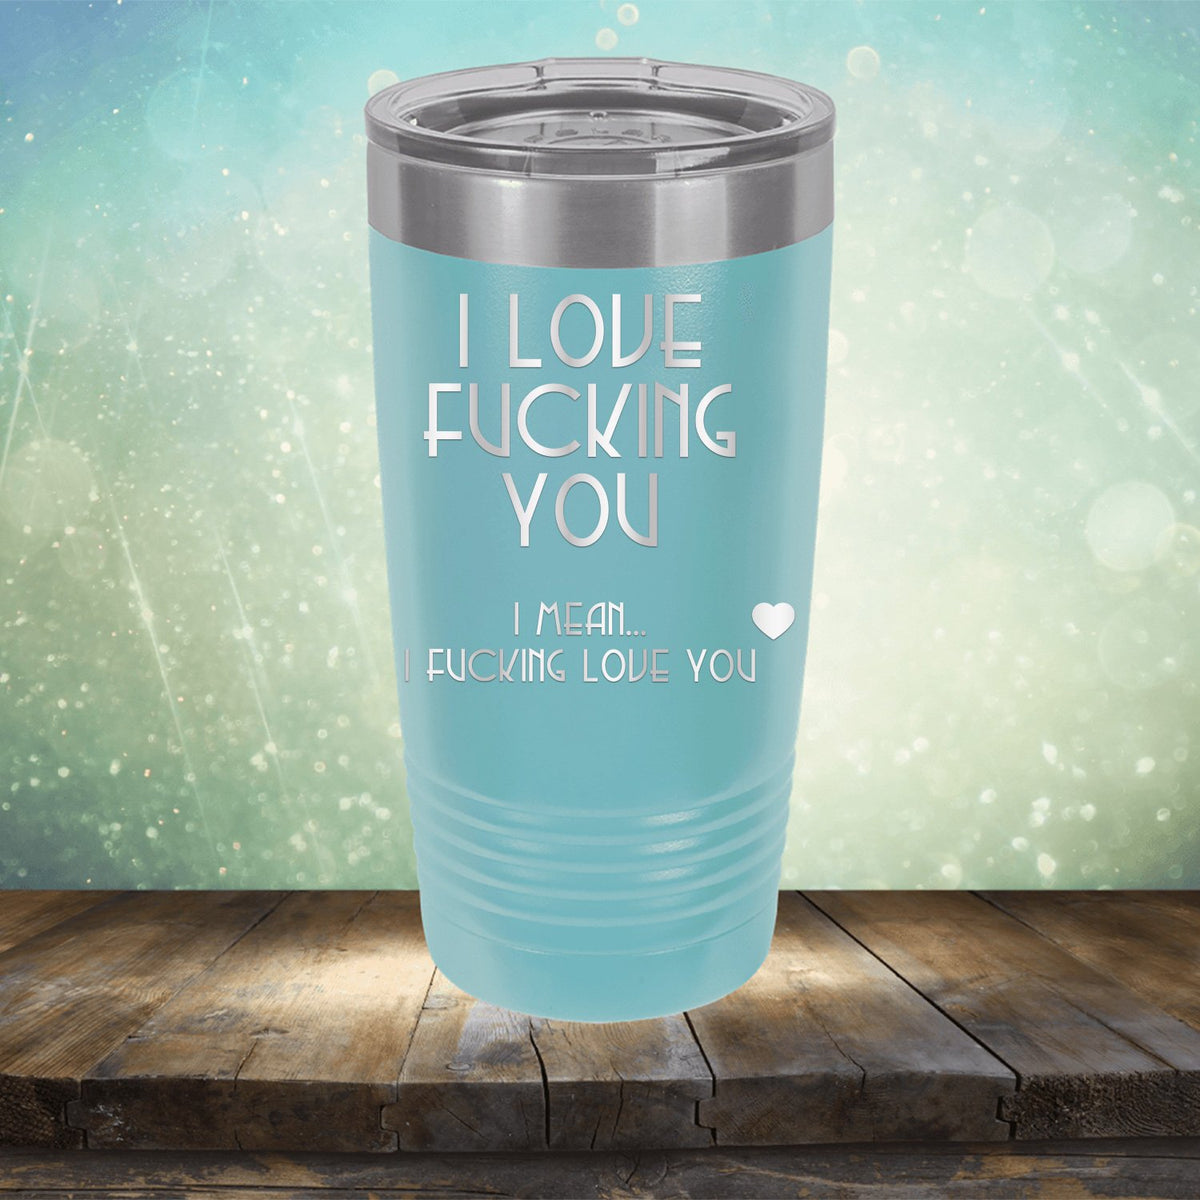 If you're an iced coffee lover like me… you need this travel cup